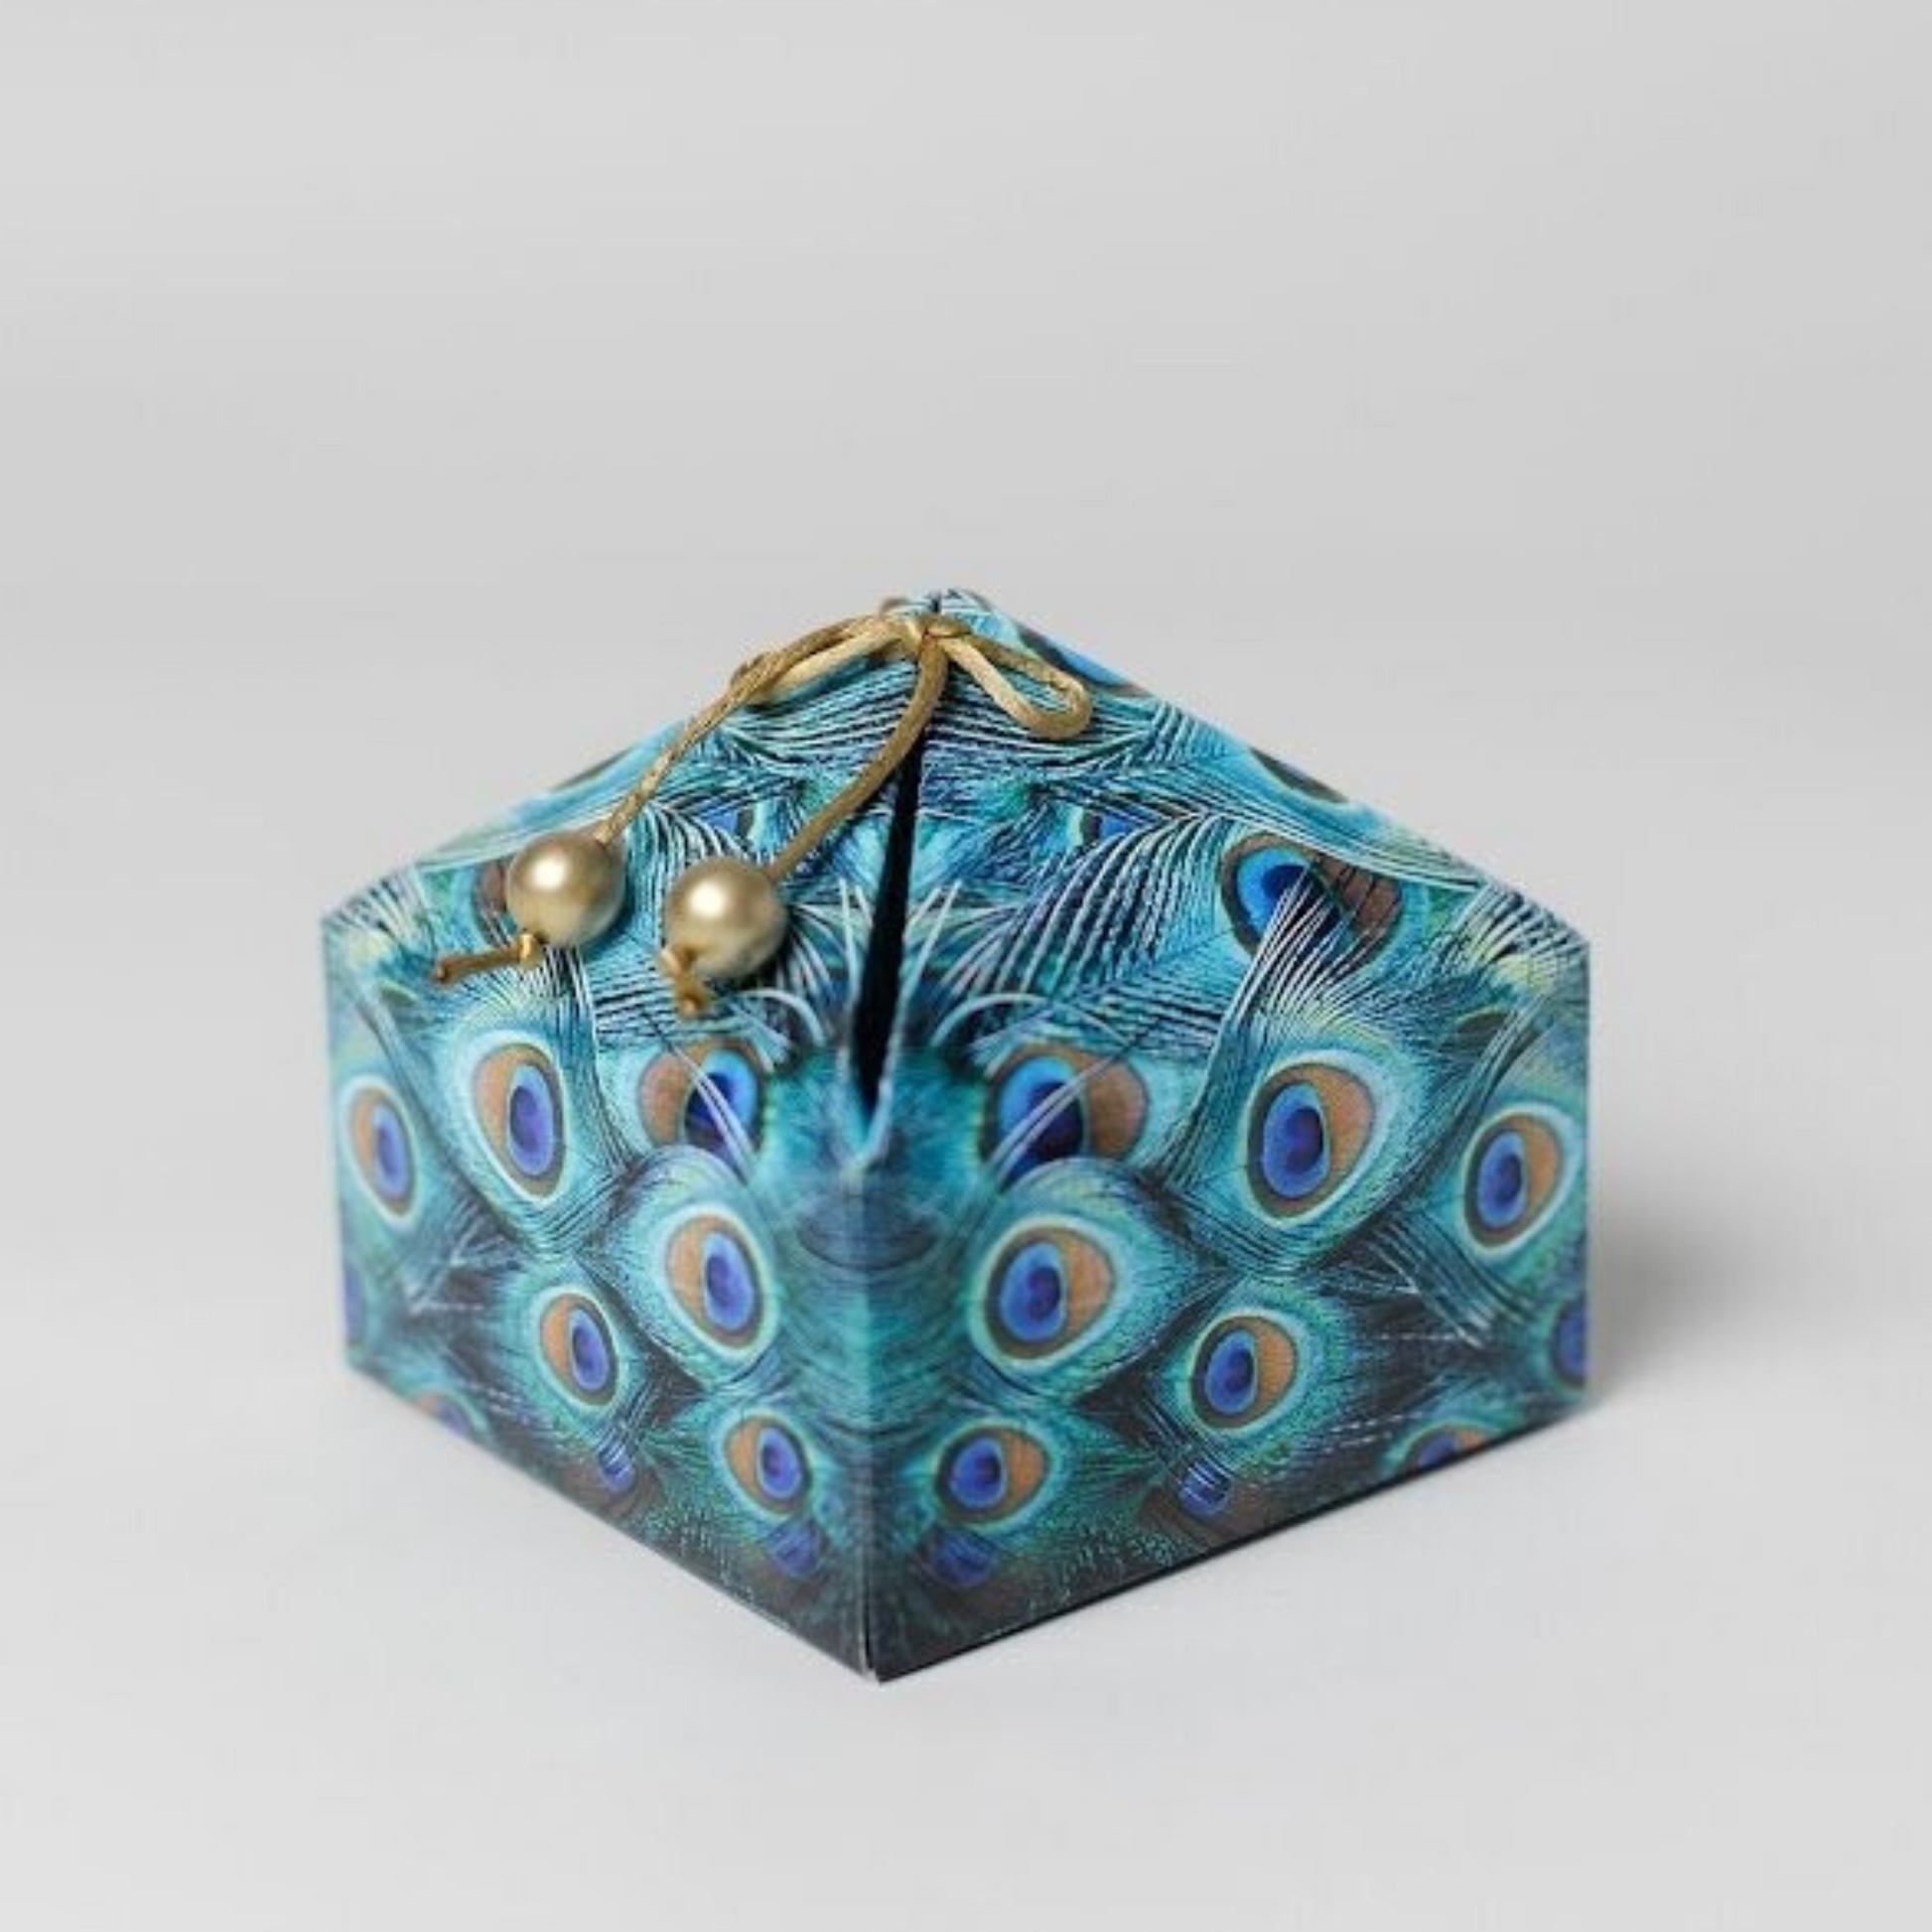 A GREAT HEXANGONAL SHAPED BOX COMPLETE WITH BEADED RIBBON TIE.